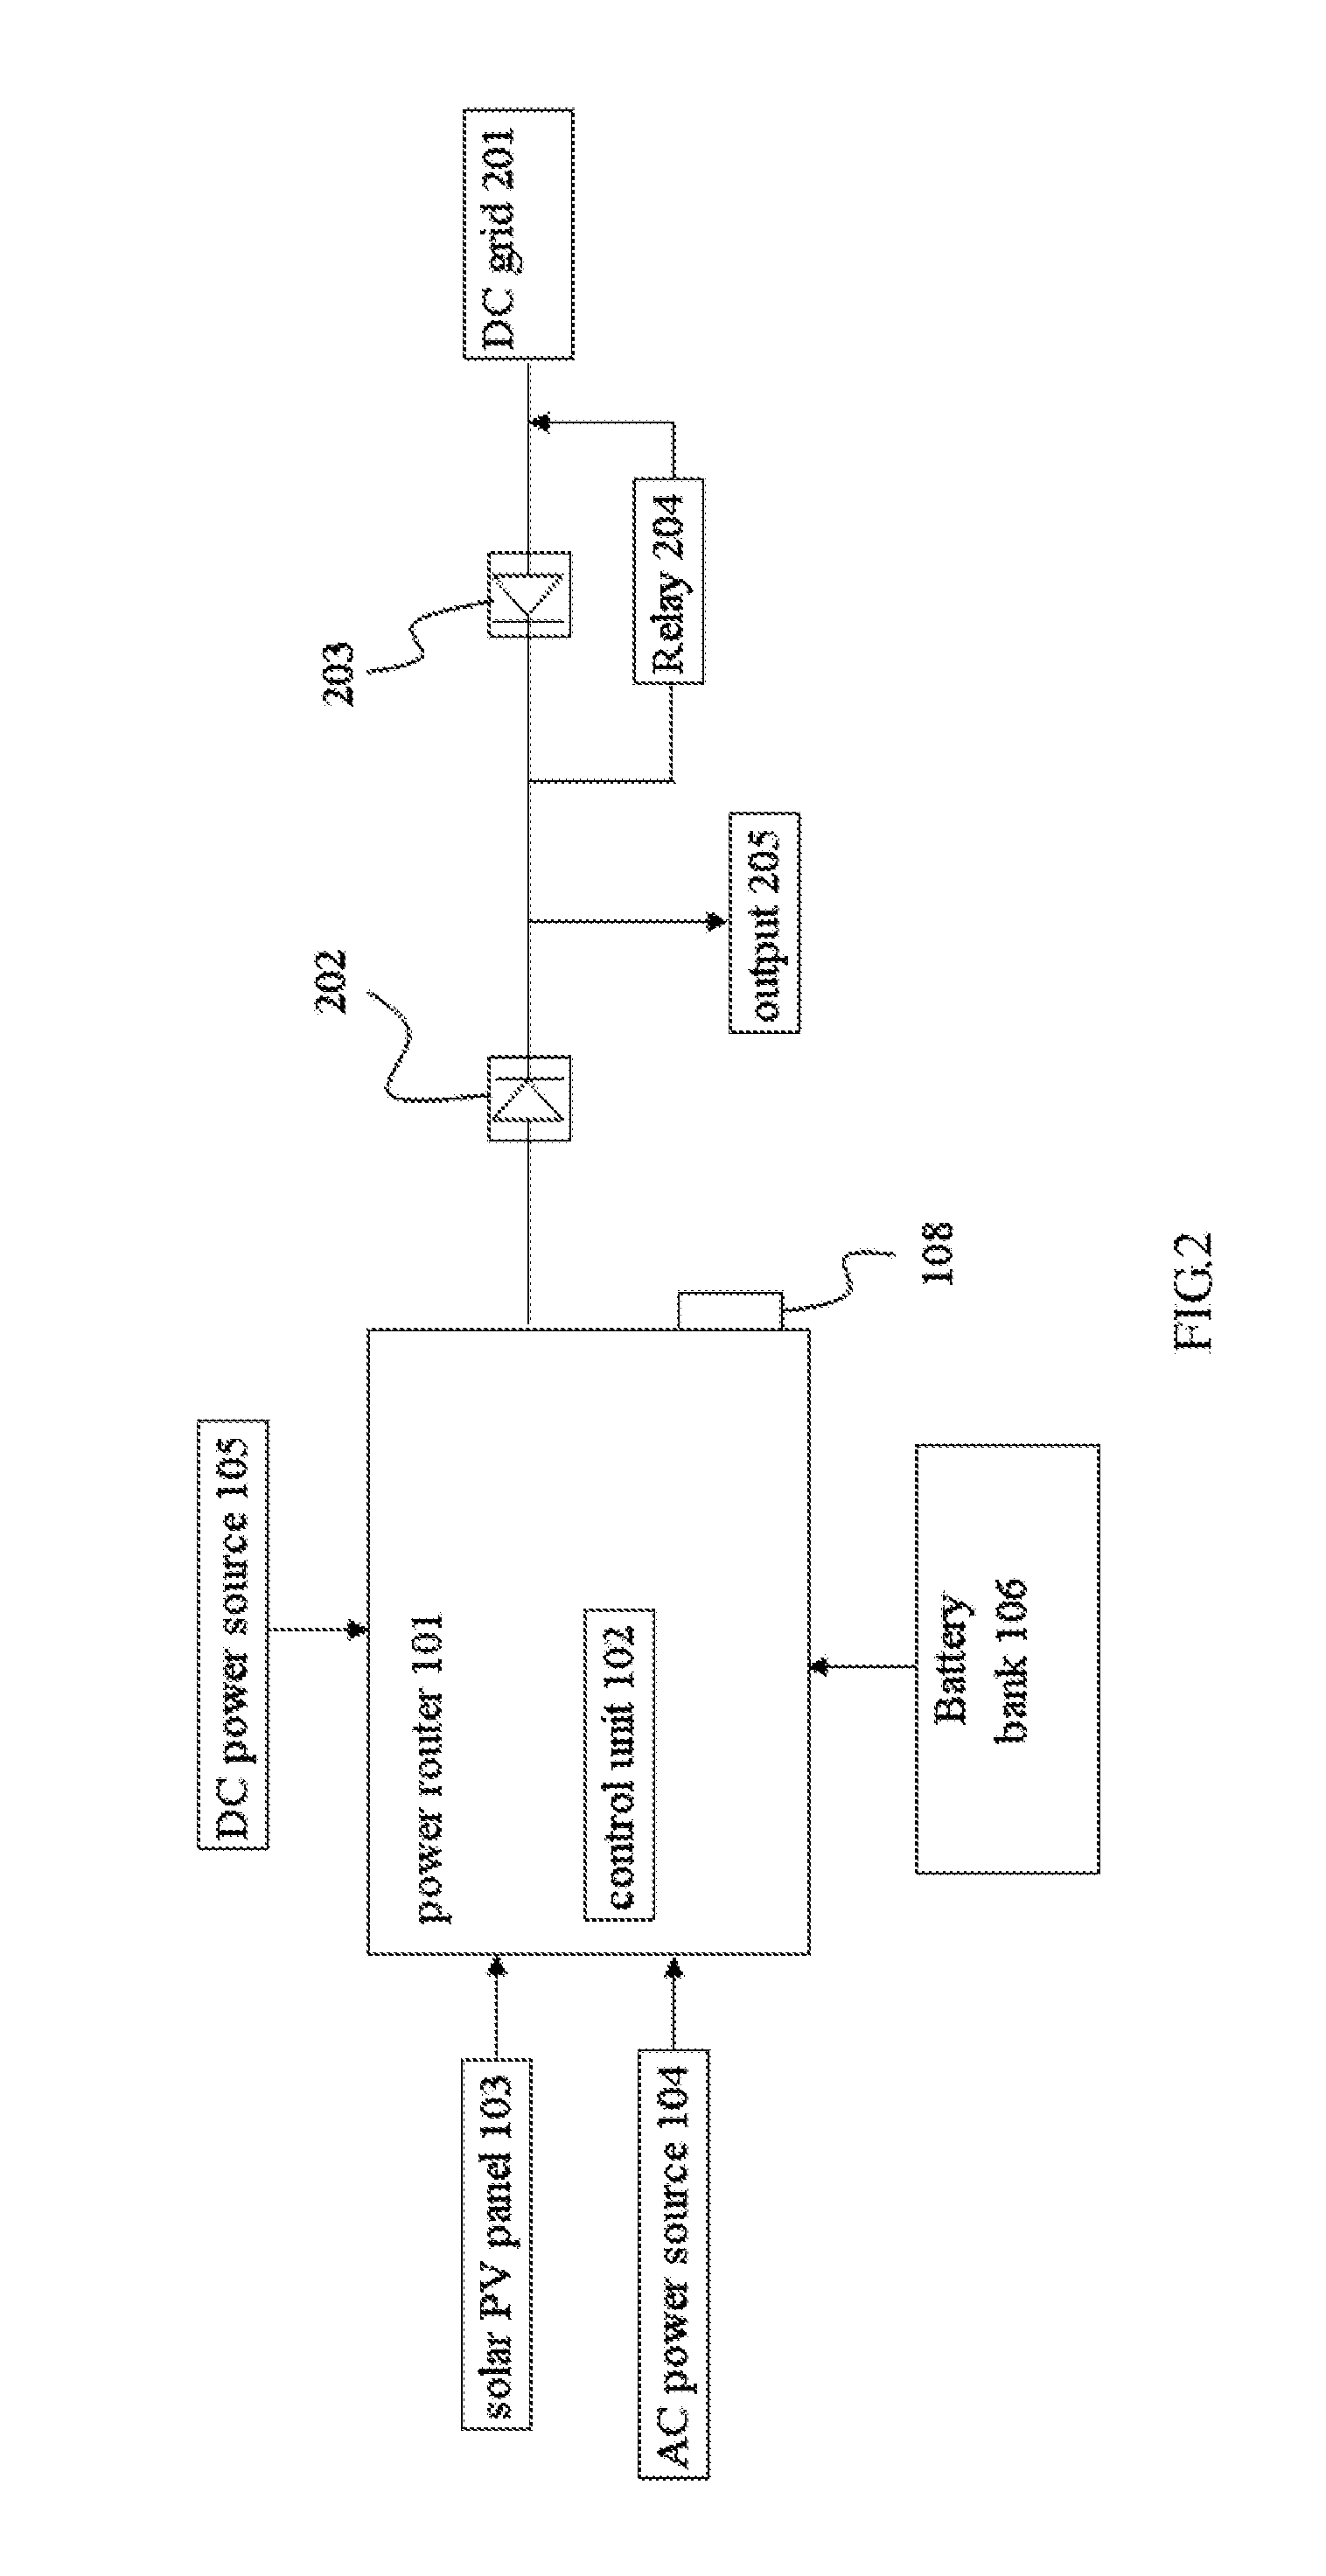 Shared Power System with Multiple Inputs